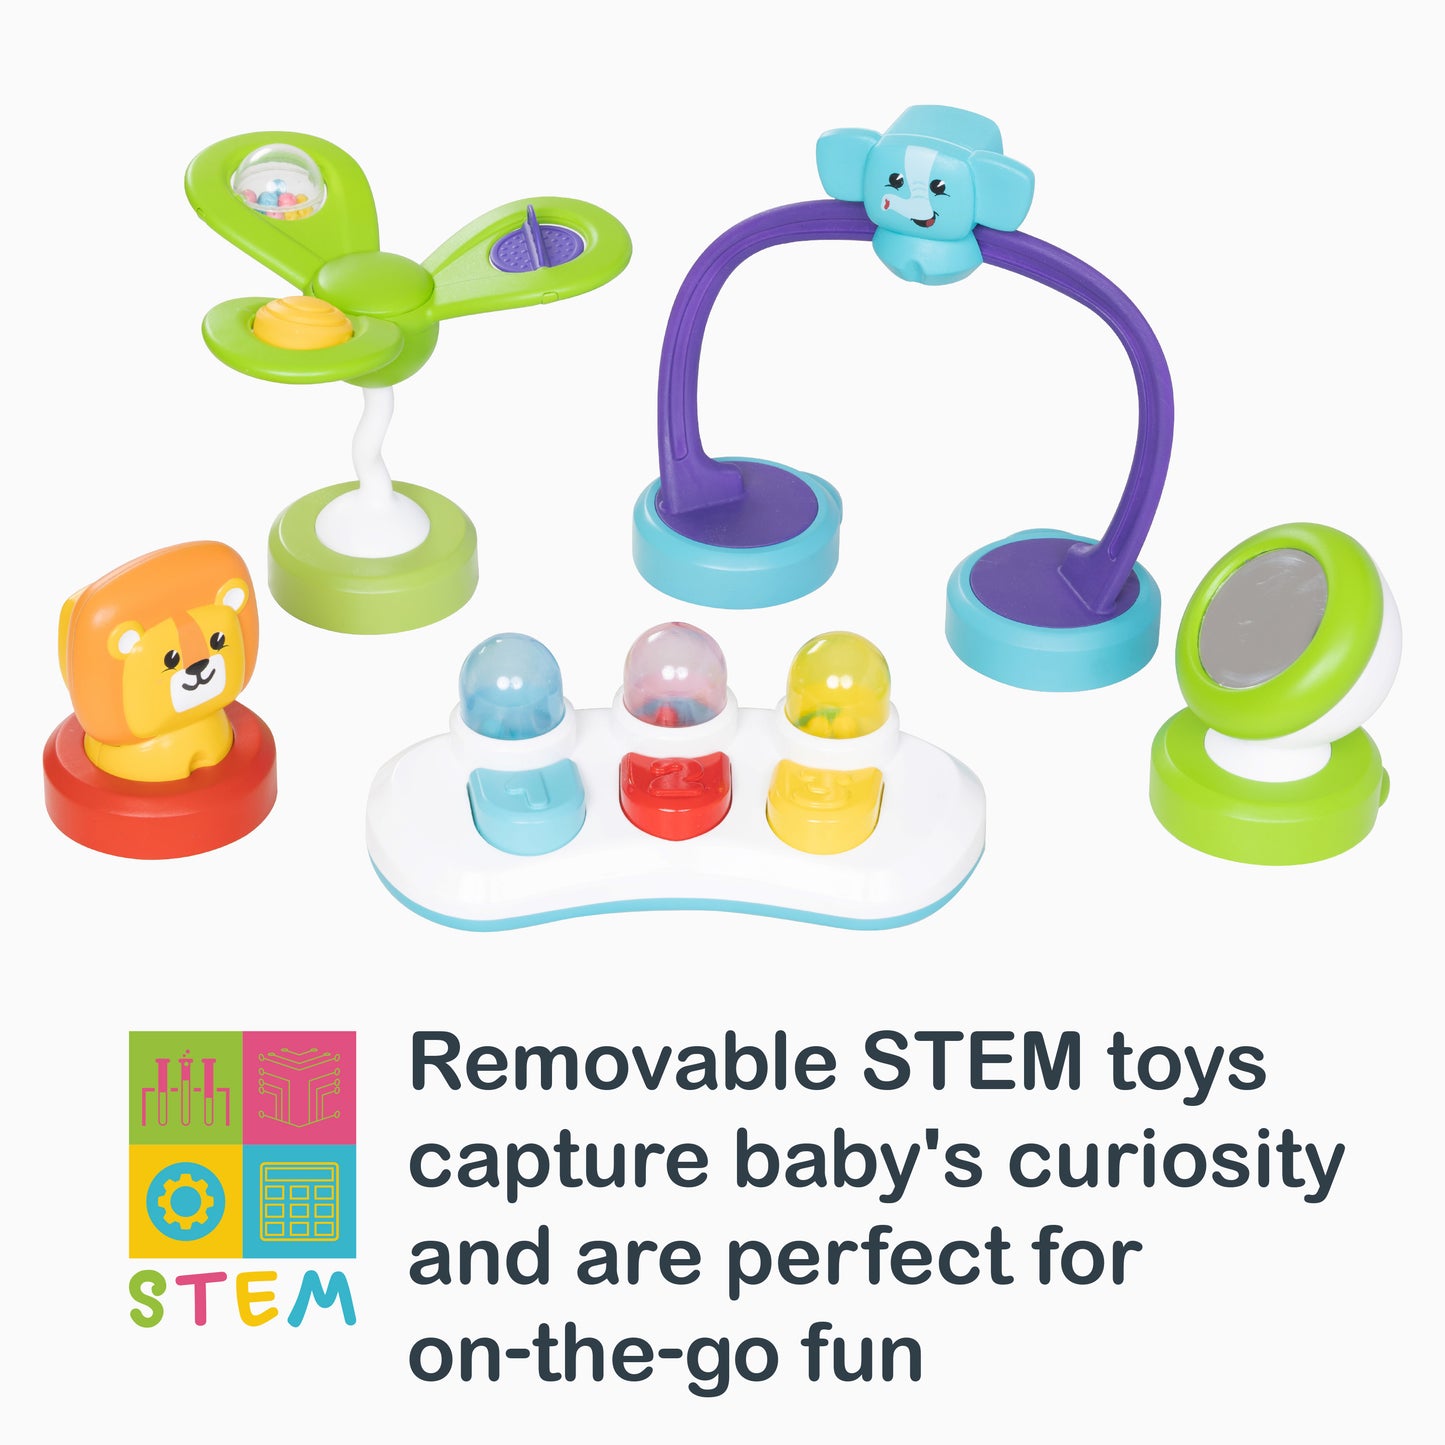 Removable STEM toys capture baby's curiosity and are perfect for on-the-go fun of the Smart Steps Bounce N' Glide 3-in-1 Activity Center Walker